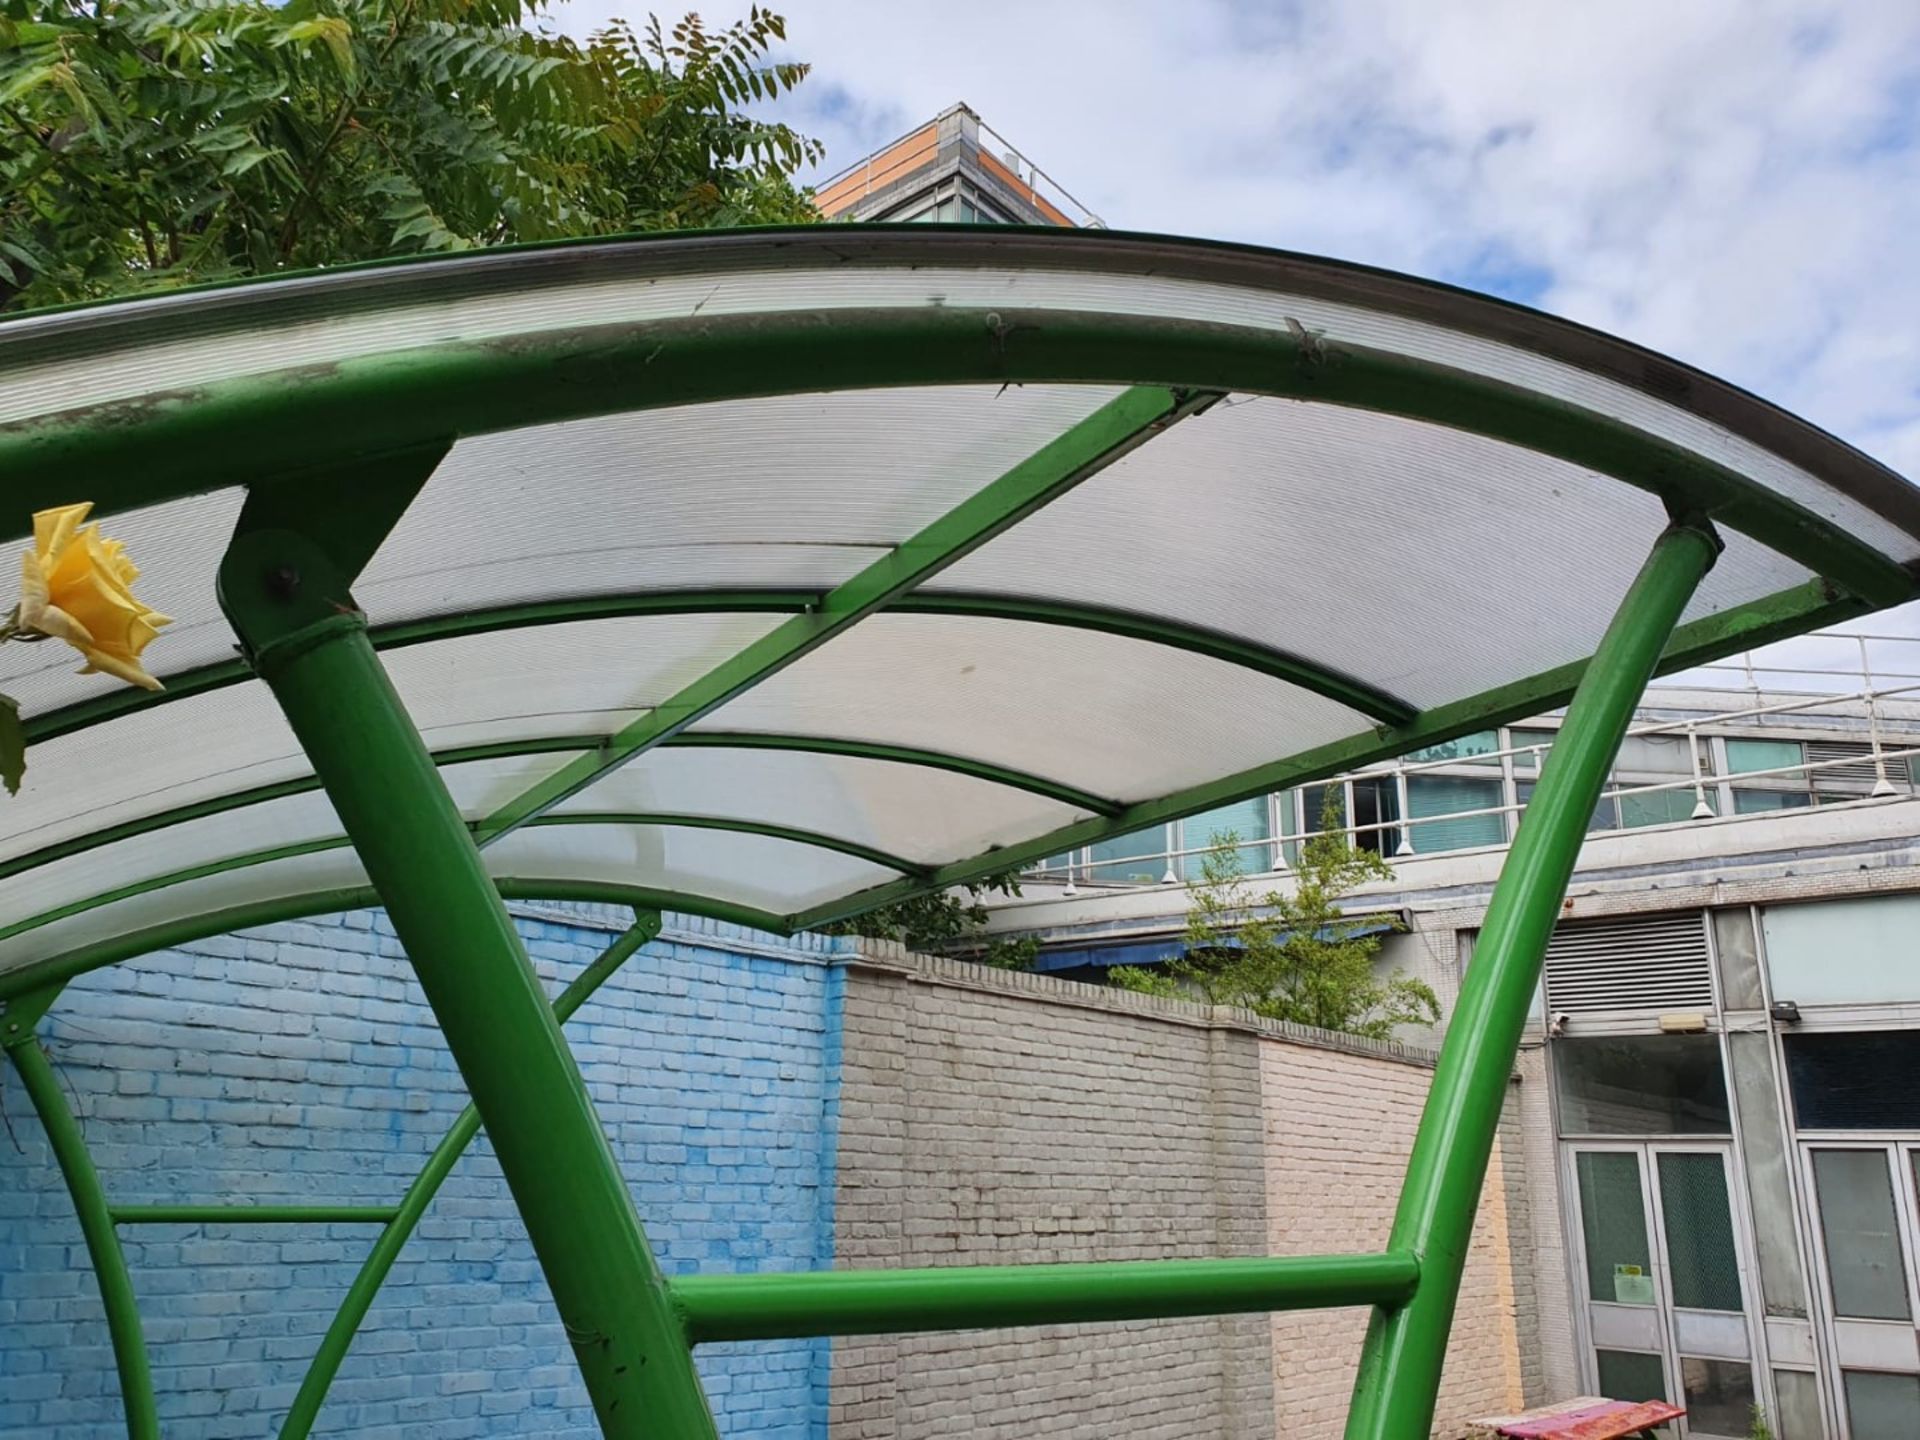 1 x Bike Shelter With Bike Racks - Suitable For Upto 8 Bikes - Contemporary Design - Suitable For - Image 6 of 9